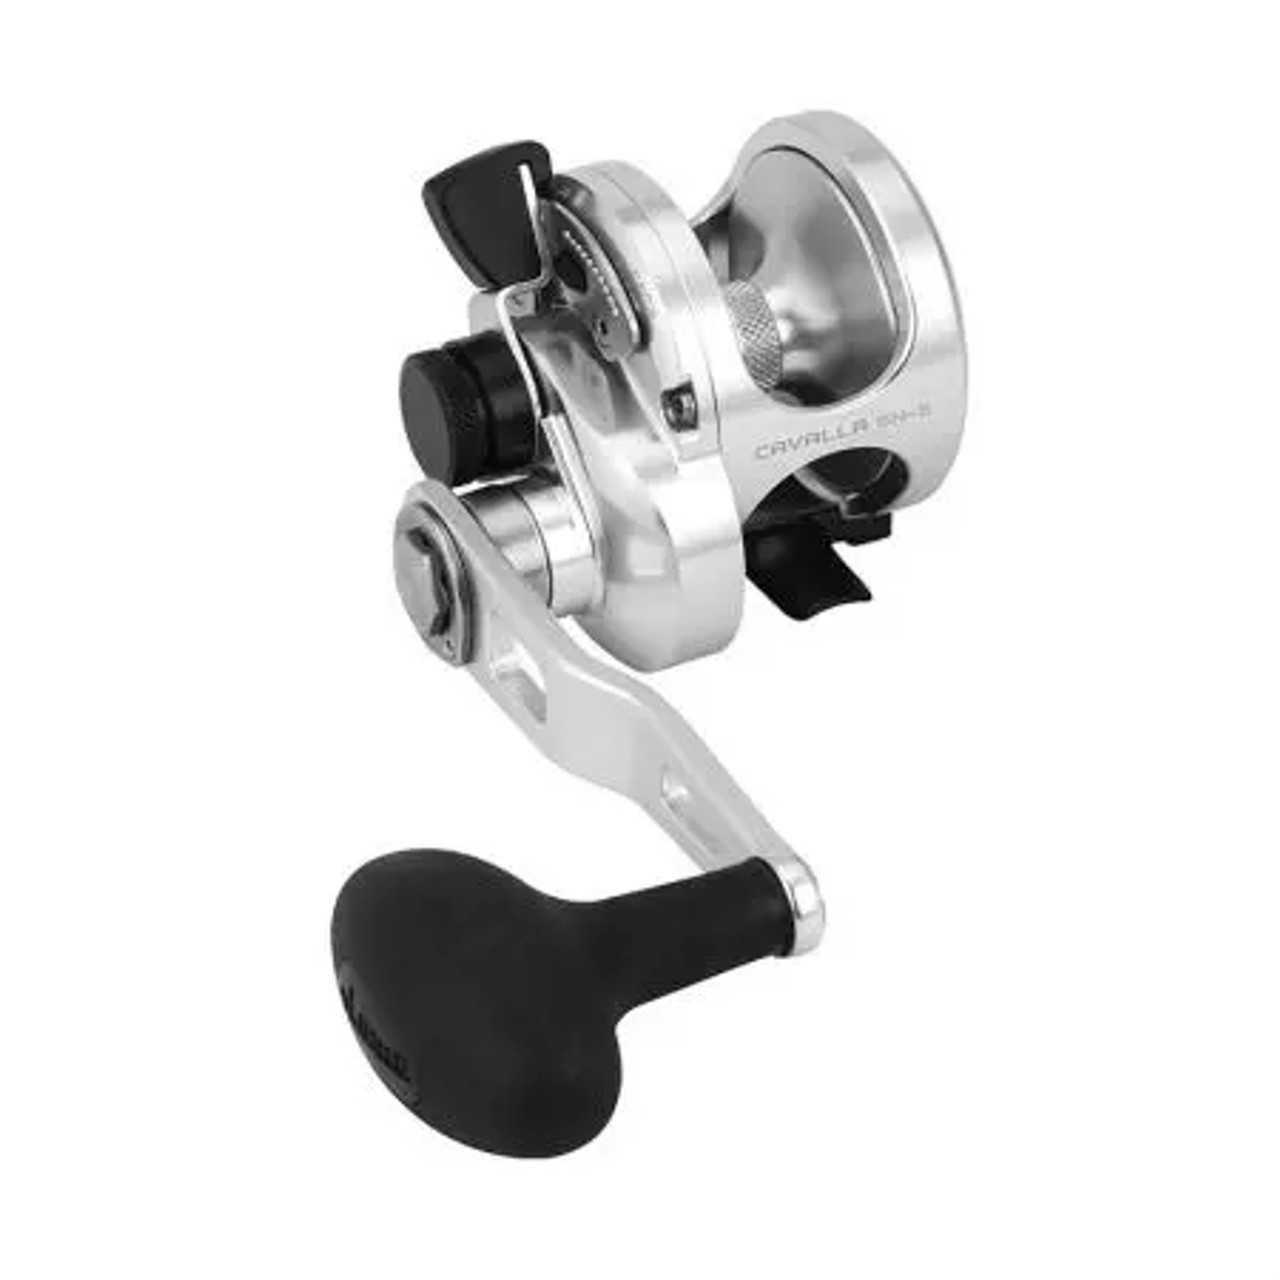 Reel in the big ones with our Okuma Makaira Lever Drag Reels